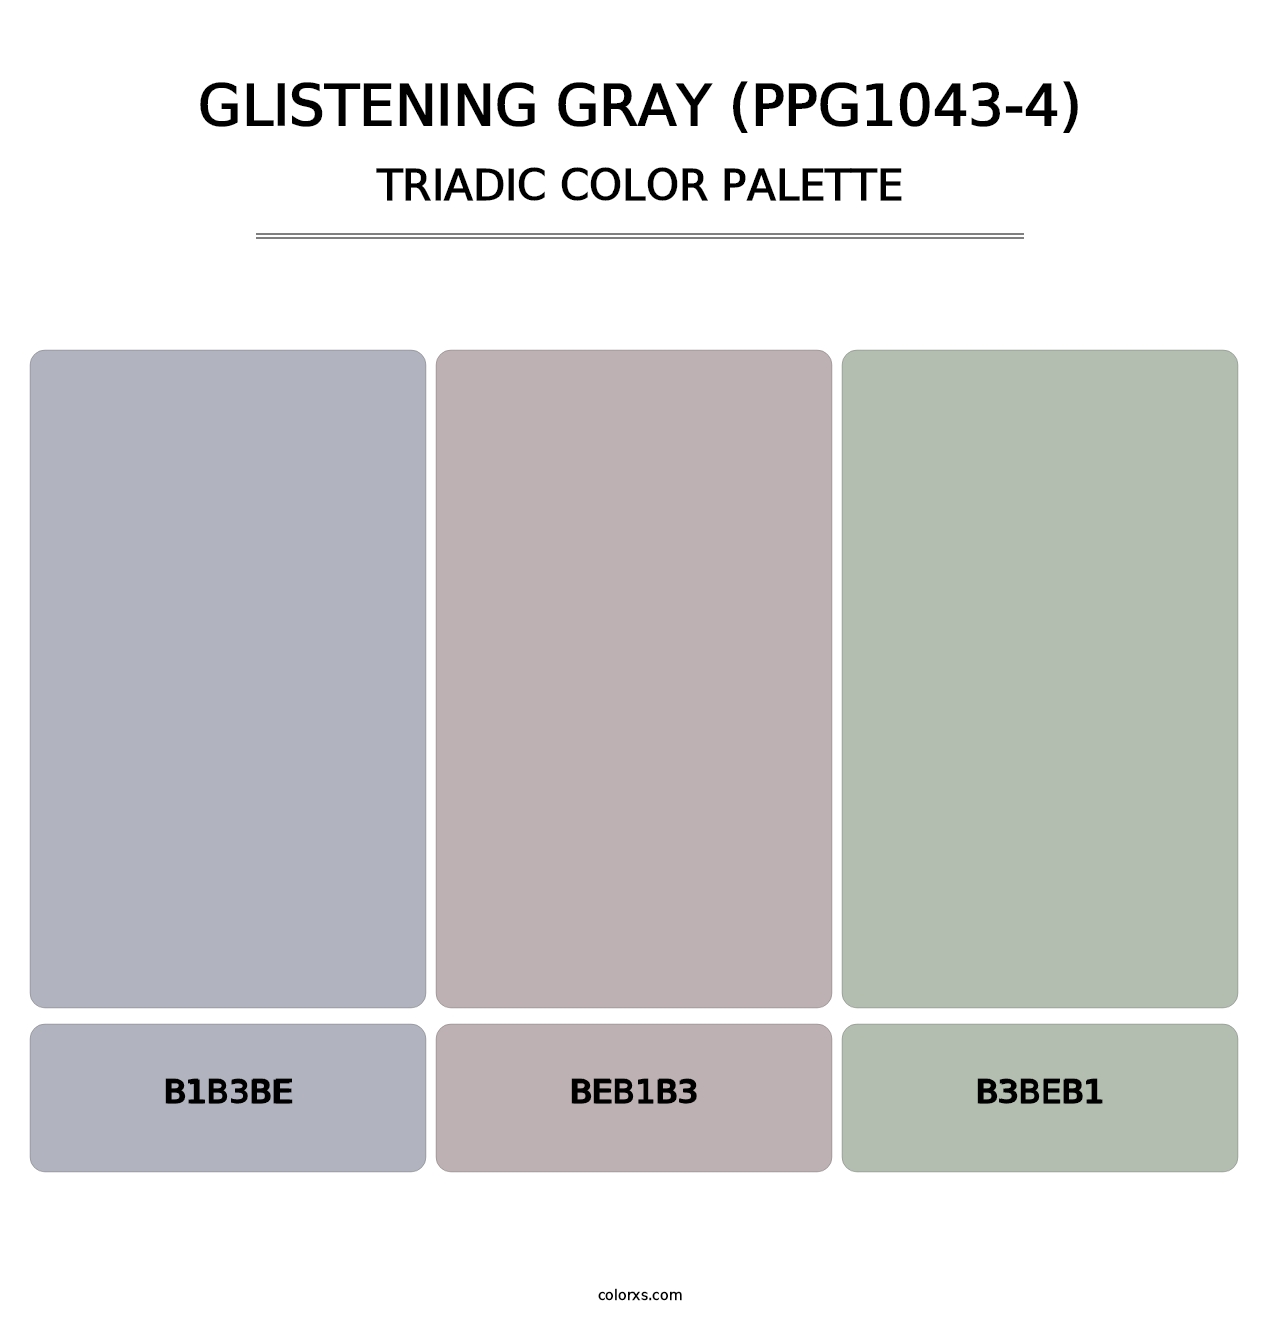 Glistening Gray (PPG1043-4) - Triadic Color Palette